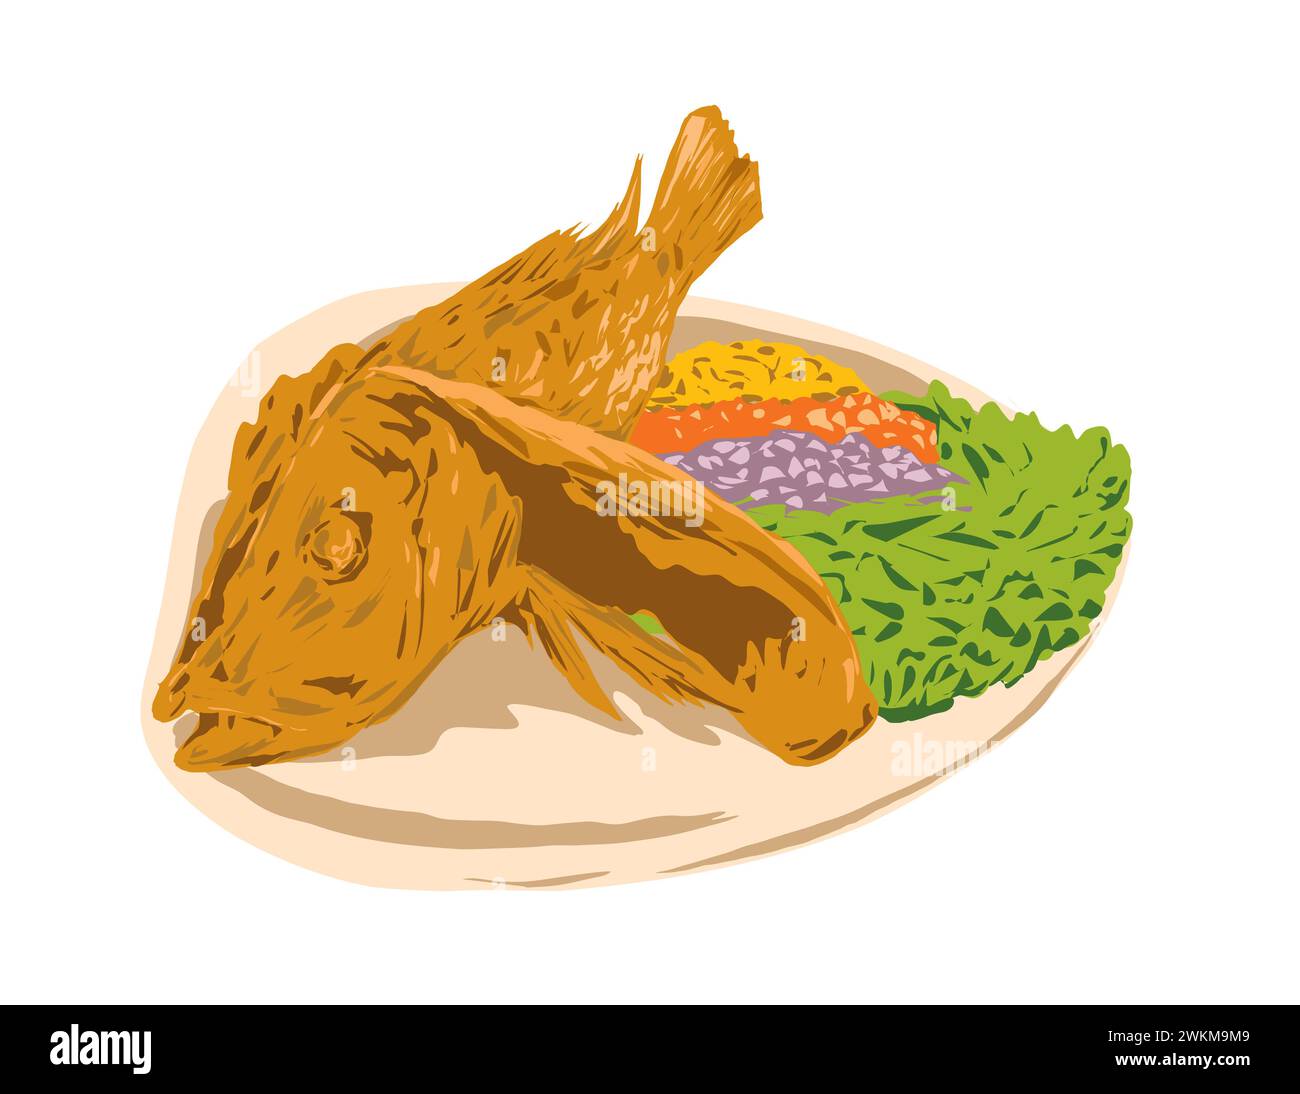 Art Deco or WPA poster of the crispy deep fried whole red snapper or lapu lapu fish dish  done in works project administration or federal art project Stock Photo